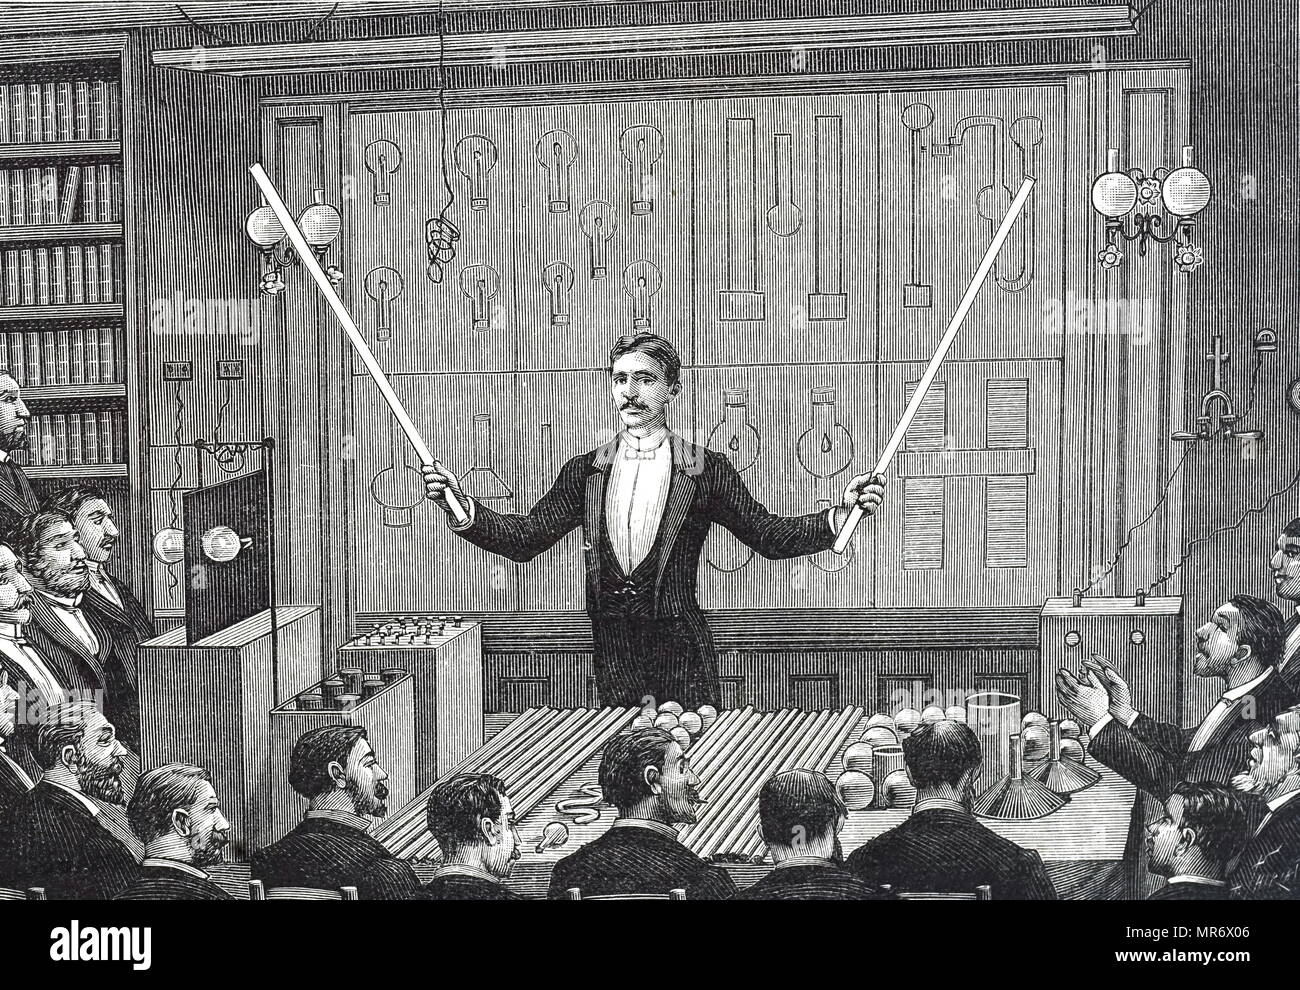 https://c8.alamy.com/comp/MR6X06/engraving-depicting-nikola-tesla-addressing-the-socit-francaise-de-physique-and-the-international-society-of-electricians-he-is-demonstrating-electrode-less-discharge-with-luminous-discharge-rods-the-forerunner-of-fluorescent-lighting-nikola-tesla-1856-1943-a-serbian-american-inventor-electrical-engineer-mechanical-engineer-physicist-and-futurist-dated-19th-century-MR6X06.jpg